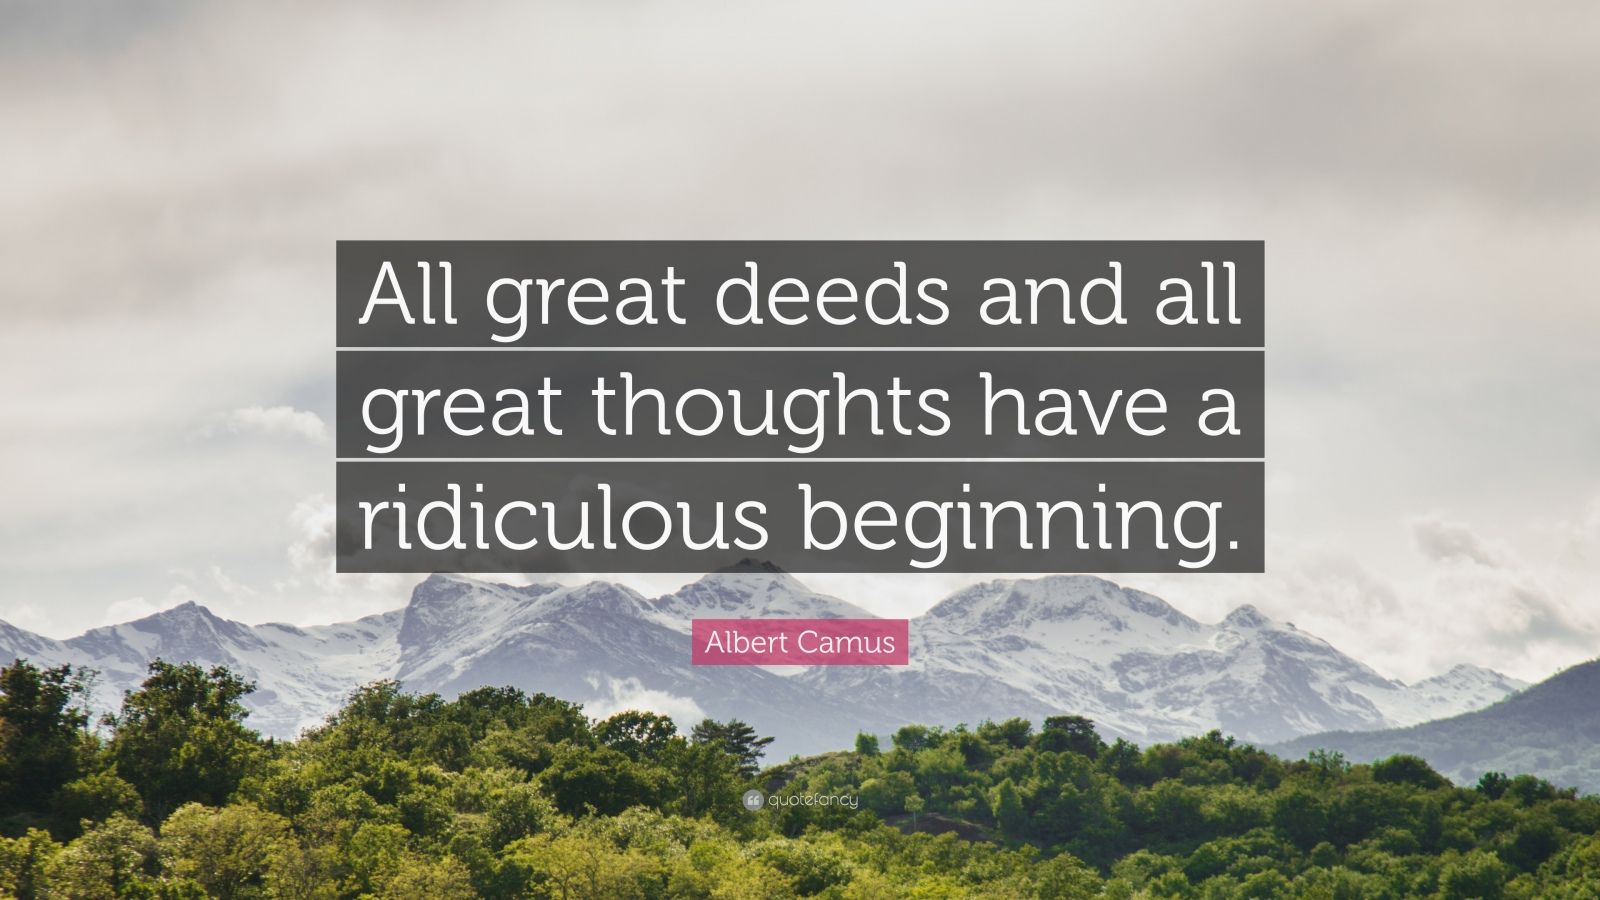 Albert Camus Quote: “All great deeds and all great thoughts have a ...